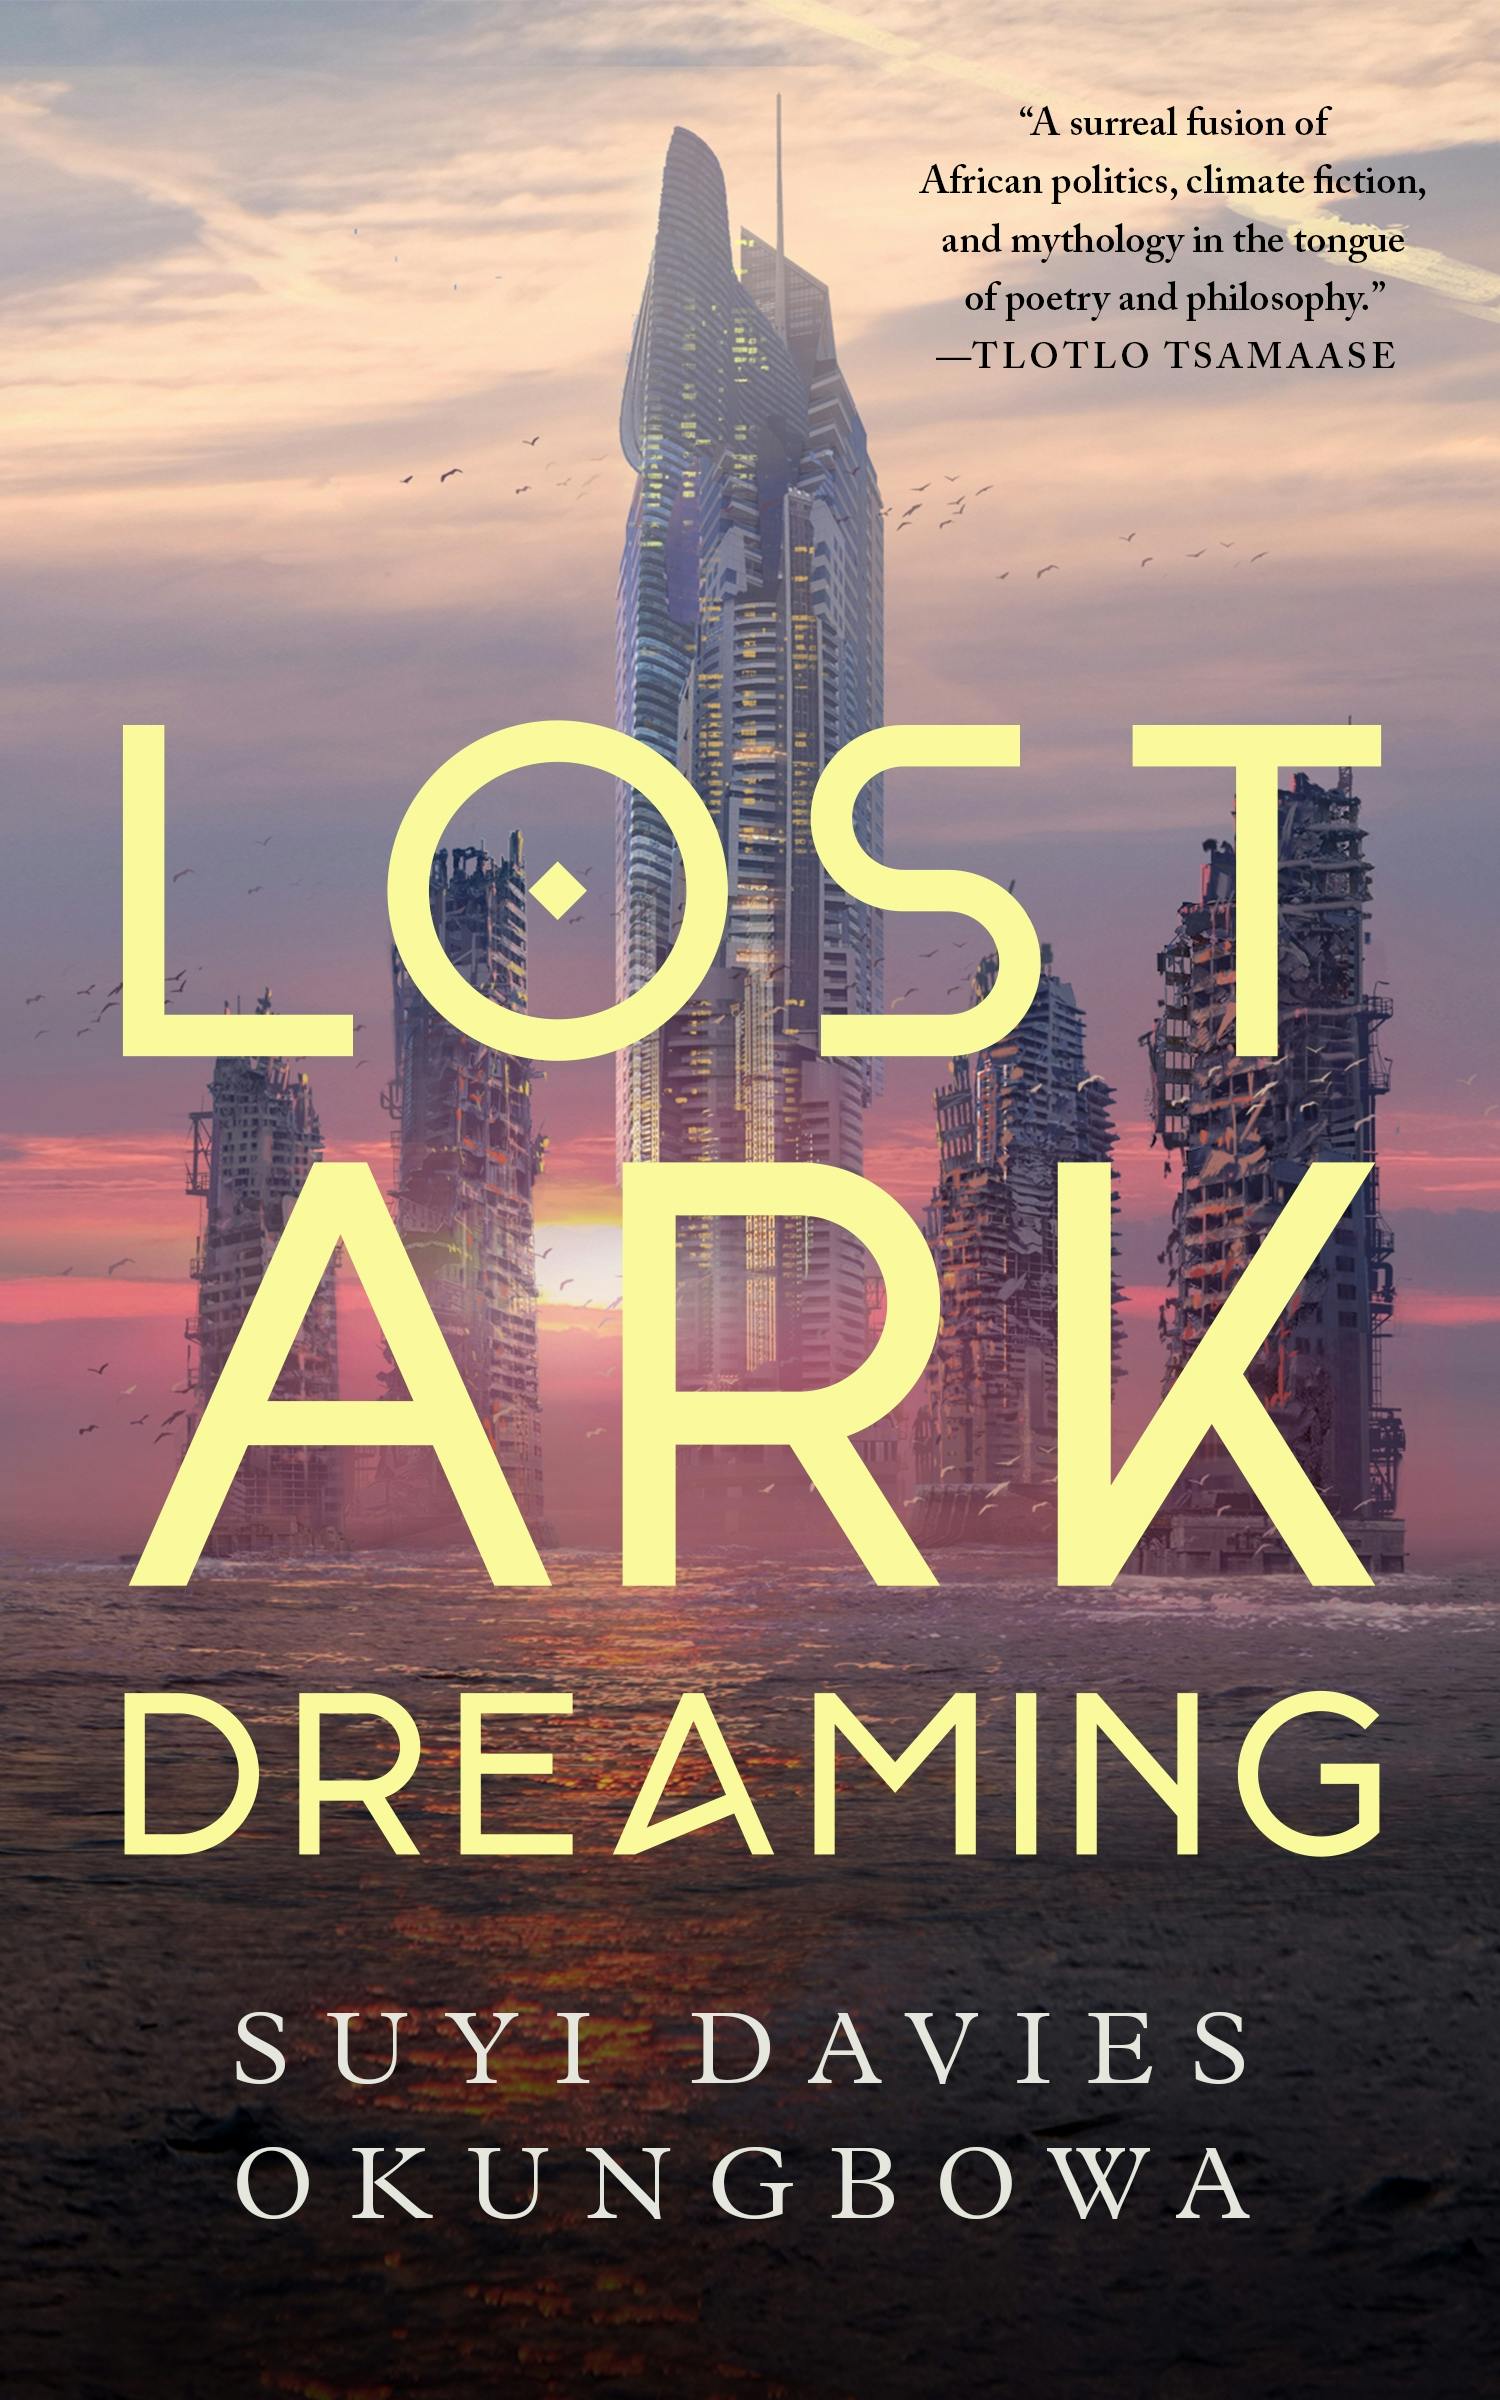 Cover for the book titled as: Lost Ark Dreaming